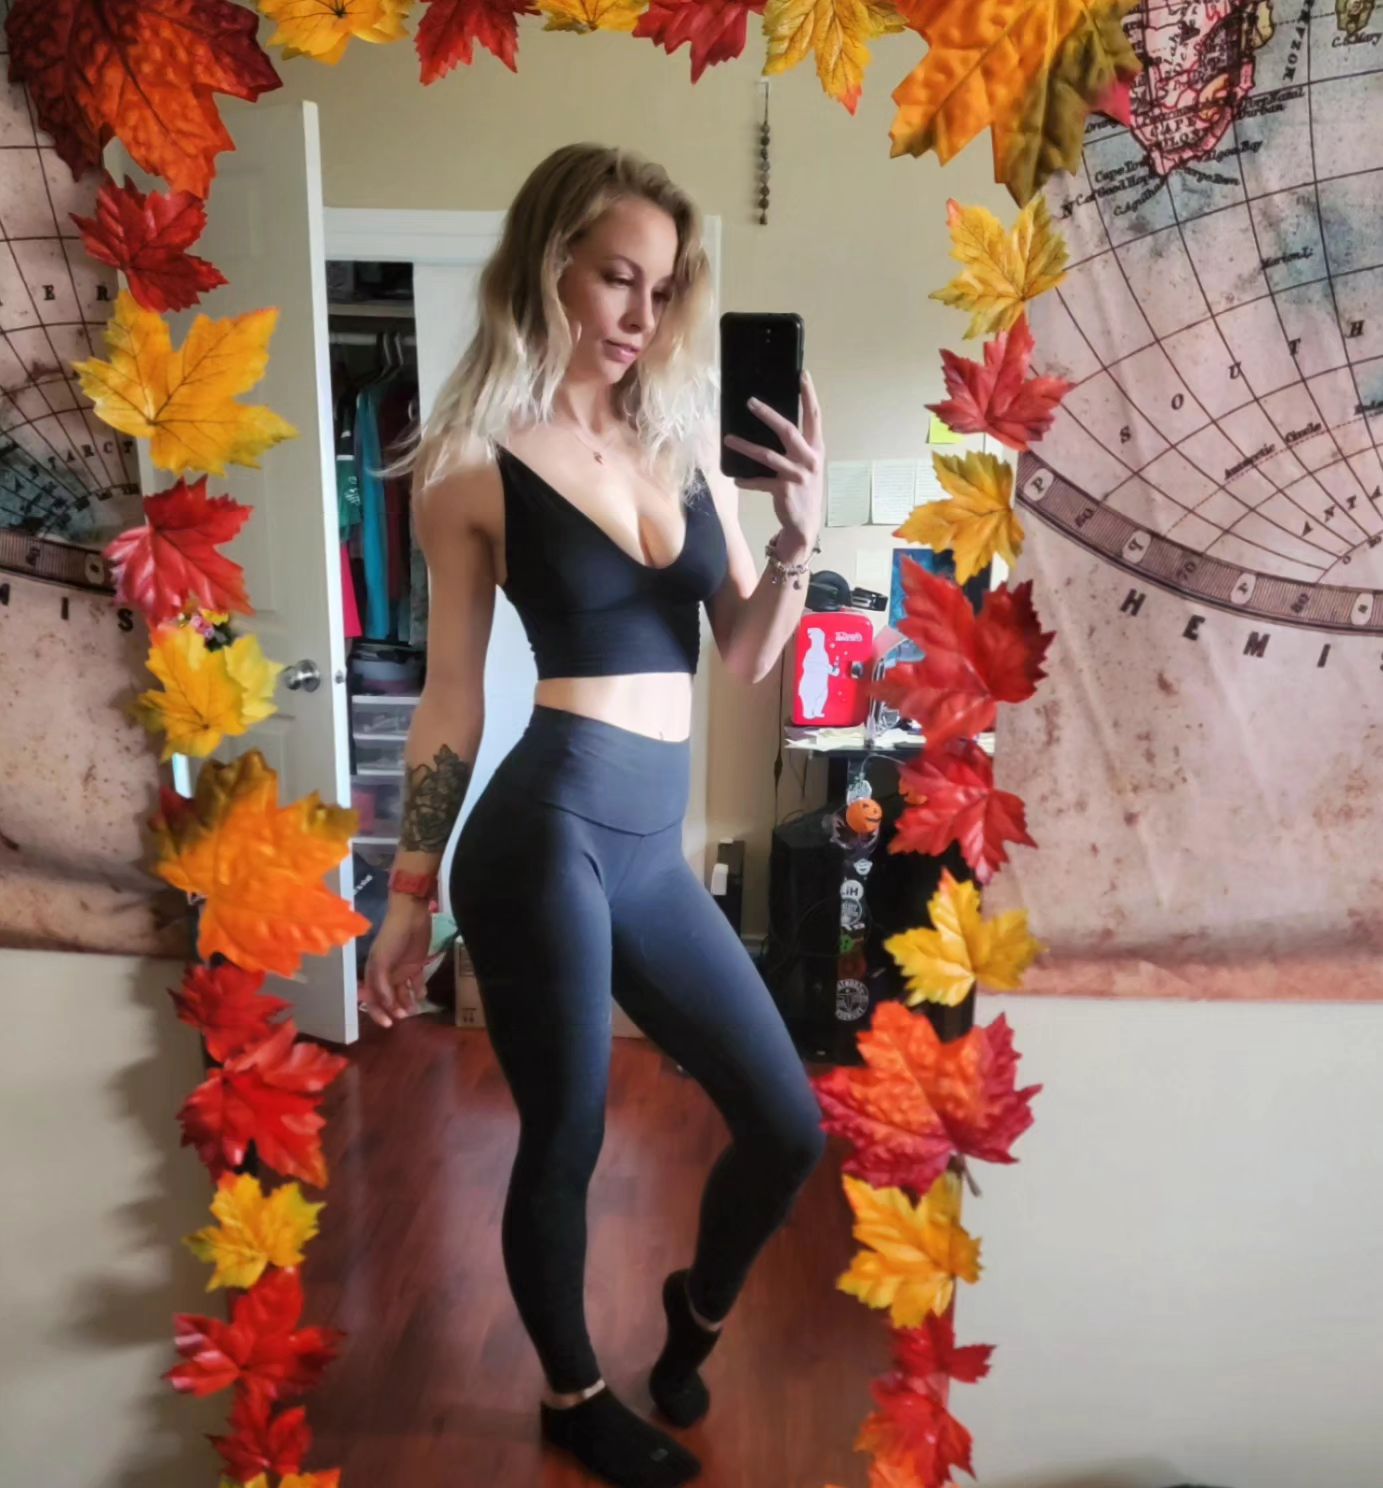 Talk about fall vibes 🍂🍁🍂

Top: @sheinofficial
Pants: @lululemon

@theofficialpandora
@fitbit

#sg #linkinbio #fitness #modelmayhem #modelsofig #modelsofinstagram #blondie #photoshoot #workout #fitnessmodel #leaves #gnd #canadianbabe #canadiangirls #canadianmodel #falldecor #beauty #discover #explore #leaves #babes #cutegirls  #mirrorselfie #autumn #halloween #autumnvibes #onlyfanz #hotmodel #beautiful #fallvibes